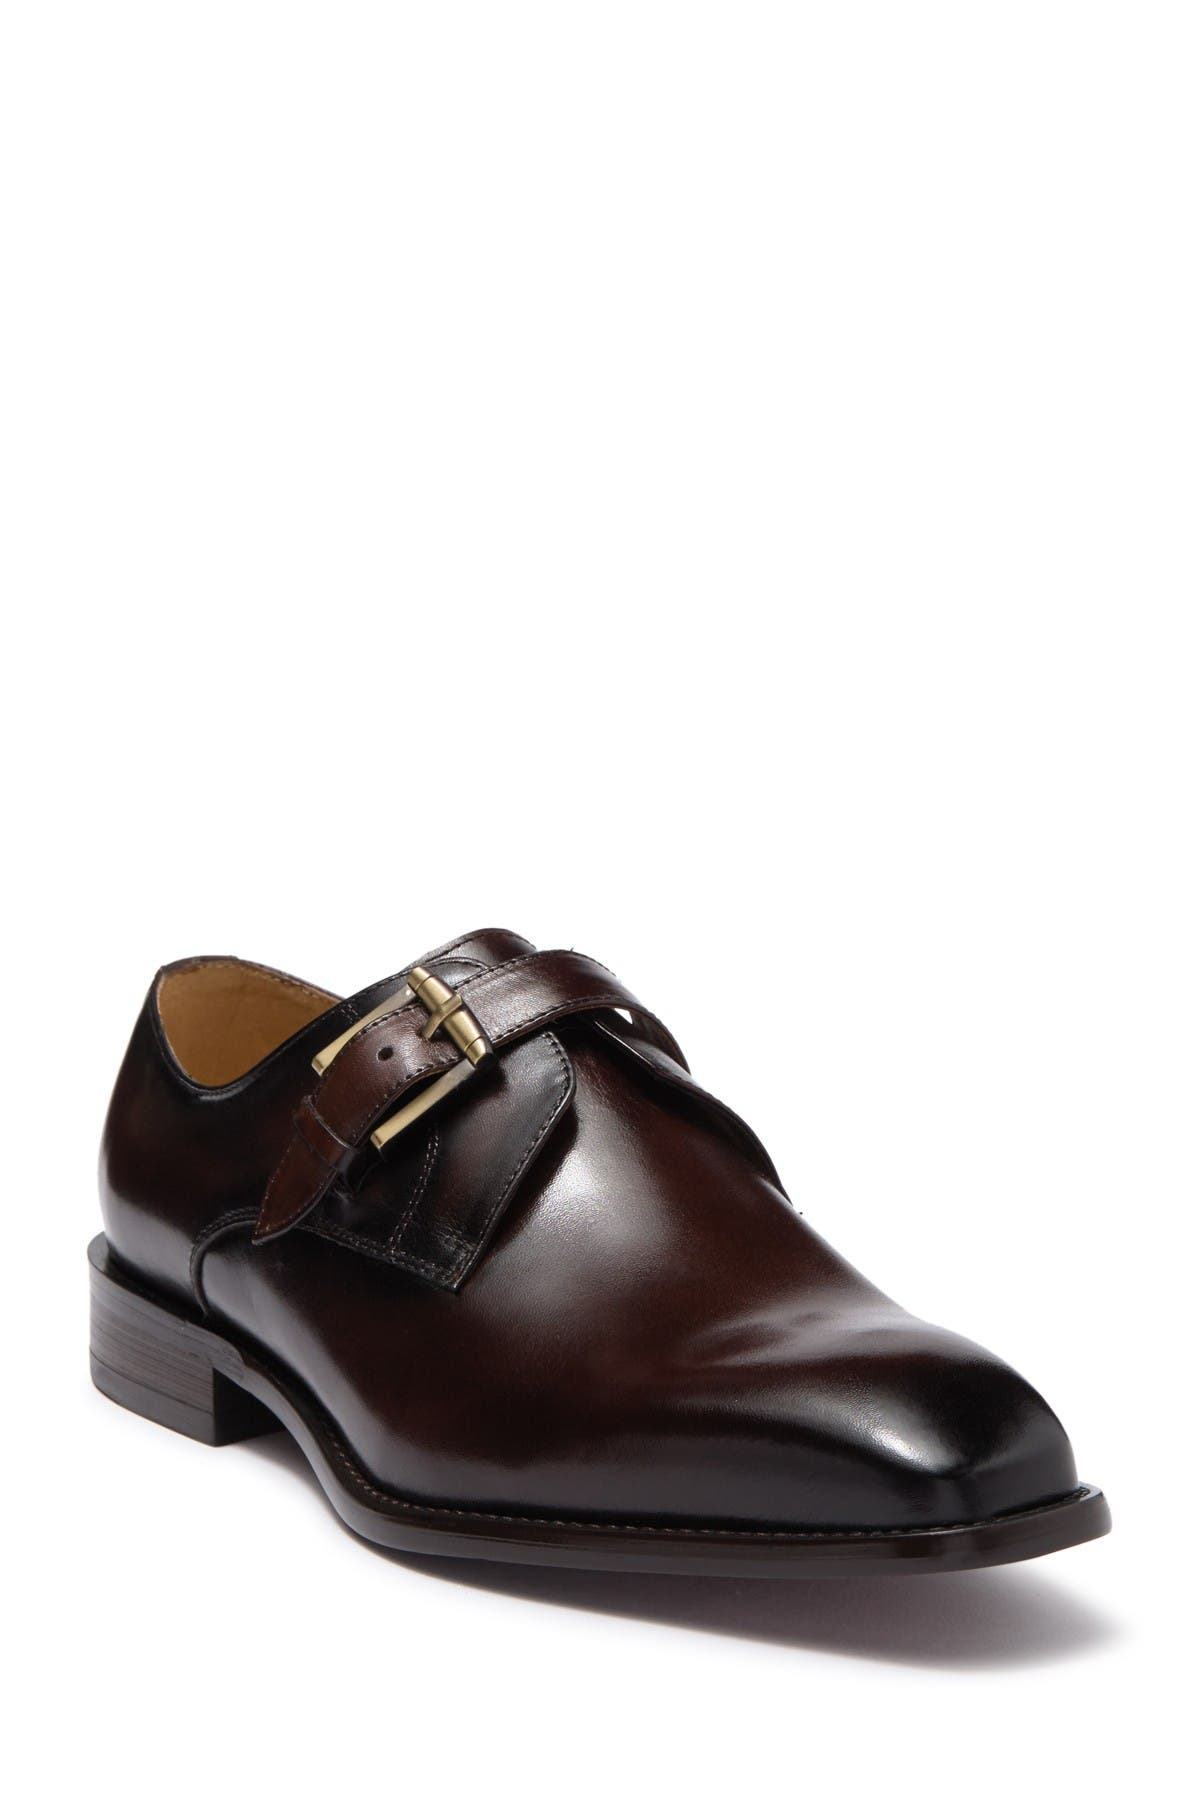 Maison Forte Davos Buckle Strap Leather Loafer In Chestnut